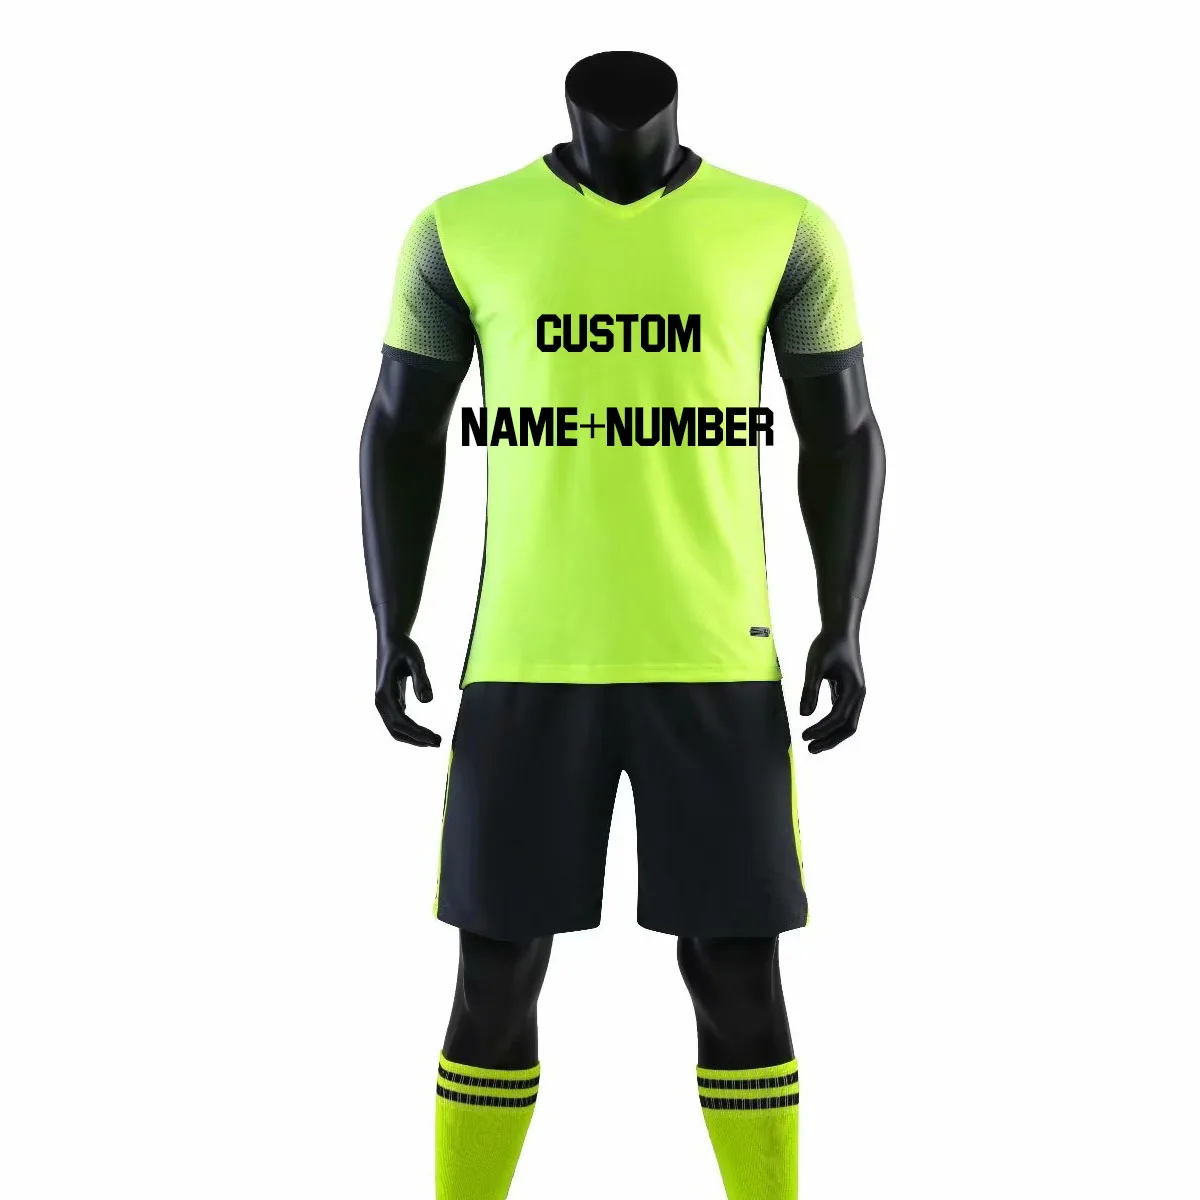 Meijunter Football Training Suit Youth Kids Adult Soccer Jerseys Sportswear Shirts Shorts Set Competition Uniforms Tracksuits 